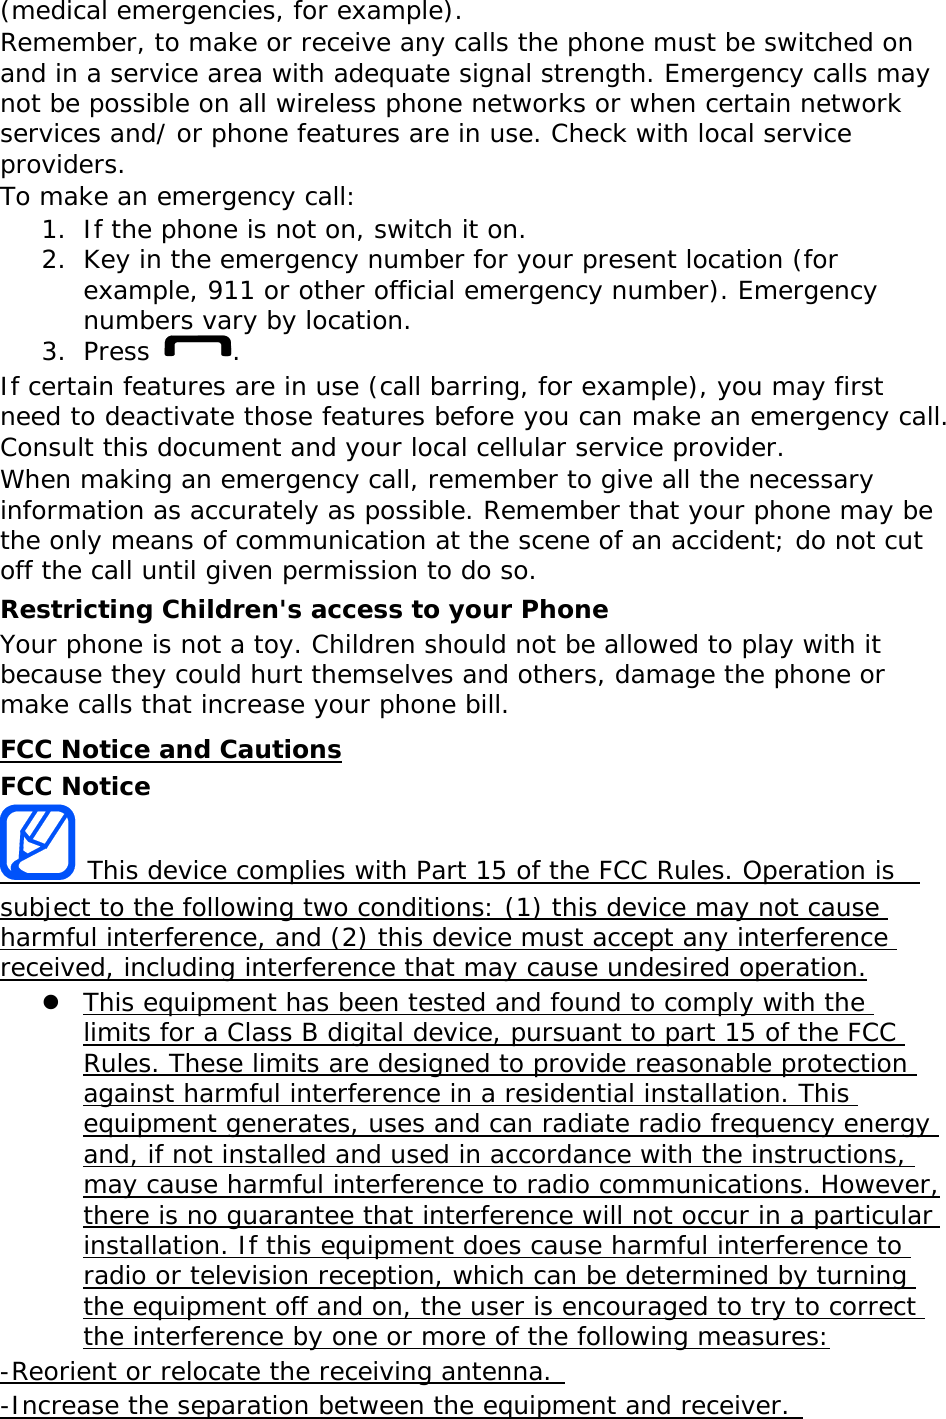 (medical emergencies, for example). Remember, to make or receive any calls the phone must be switched on and in a service area with adequate signal strength. Emergency calls may not be possible on all wireless phone networks or when certain network services and/ or phone features are in use. Check with local service providers. To make an emergency call: 1. If the phone is not on, switch it on. 2. Key in the emergency number for your present location (for example, 911 or other official emergency number). Emergency numbers vary by location. 3. Press  . If certain features are in use (call barring, for example), you may first need to deactivate those features before you can make an emergency call. Consult this document and your local cellular service provider. When making an emergency call, remember to give all the necessary information as accurately as possible. Remember that your phone may be the only means of communication at the scene of an accident; do not cut off the call until given permission to do so. Restricting Children&apos;s access to your Phone Your phone is not a toy. Children should not be allowed to play with it because they could hurt themselves and others, damage the phone or make calls that increase your phone bill. FCC Notice and Cautions FCC Notice  This device complies with Part 15 of the FCC Rules. Operation is  subject to the following two conditions: (1) this device may not cause harmful interference, and (2) this device must accept any interference received, including interference that may cause undesired operation.  This equipment has been tested and found to comply with the limits for a Class B digital device, pursuant to part 15 of the FCC Rules. These limits are designed to provide reasonable protection against harmful interference in a residential installation. This equipment generates, uses and can radiate radio frequency energy and, if not installed and used in accordance with the instructions, may cause harmful interference to radio communications. However, there is no guarantee that interference will not occur in a particular installation. If this equipment does cause harmful interference to radio or television reception, which can be determined by turning the equipment off and on, the user is encouraged to try to correct the interference by one or more of the following measures: -Reorient or relocate the receiving antenna.  -Increase the separation between the equipment and receiver.  